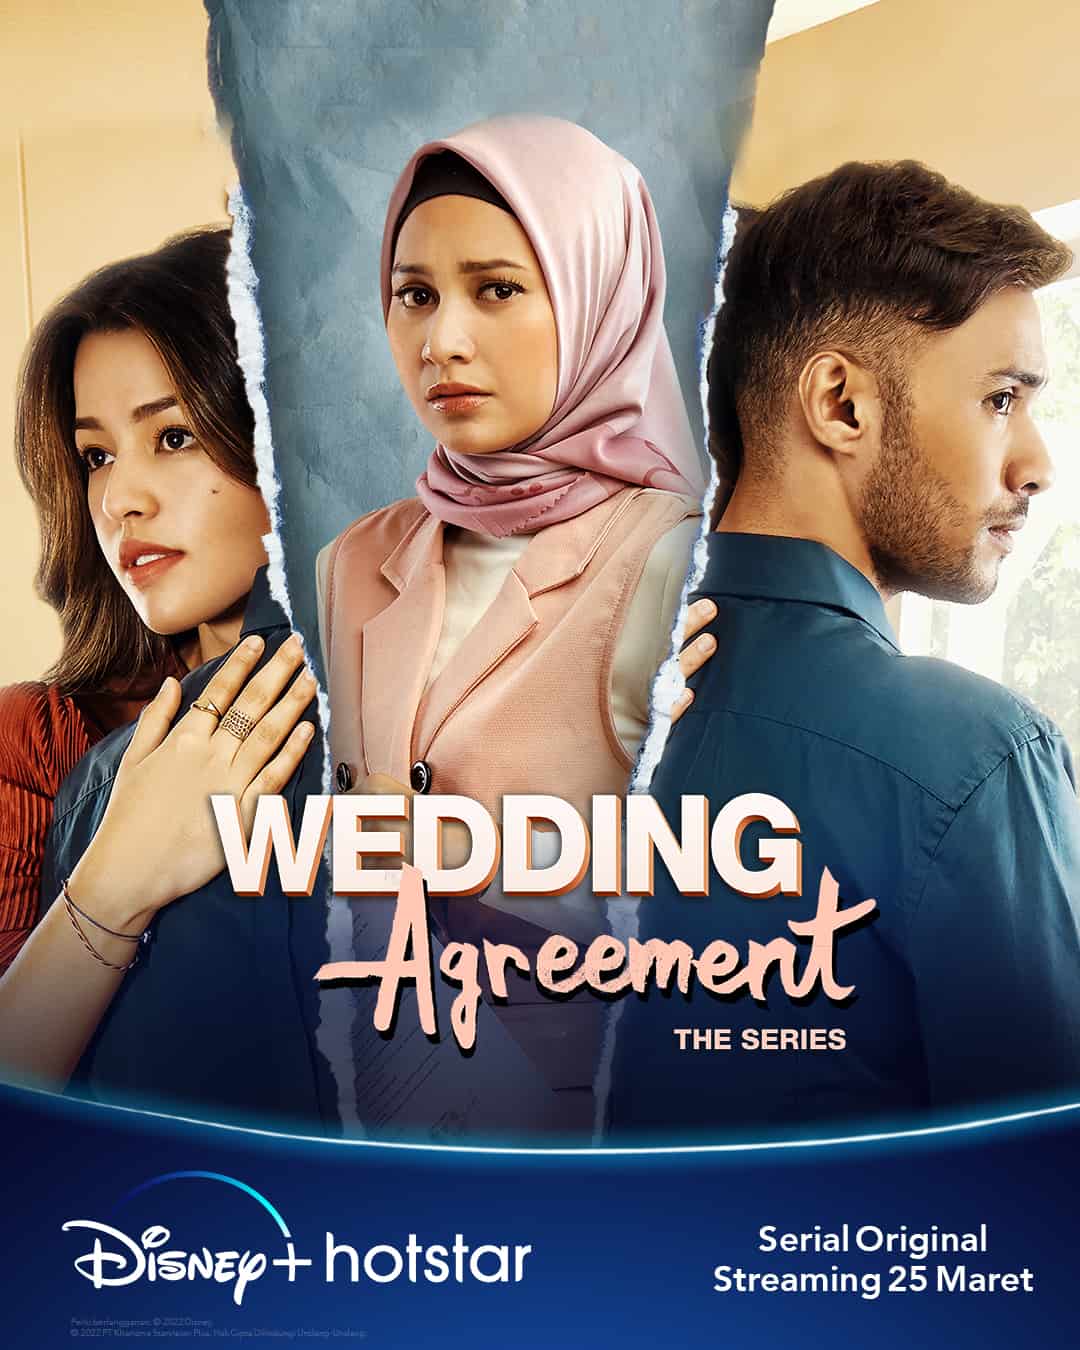 Wedding Agreement The Series - Sinopsis, Pemain, OST, Episode, Review